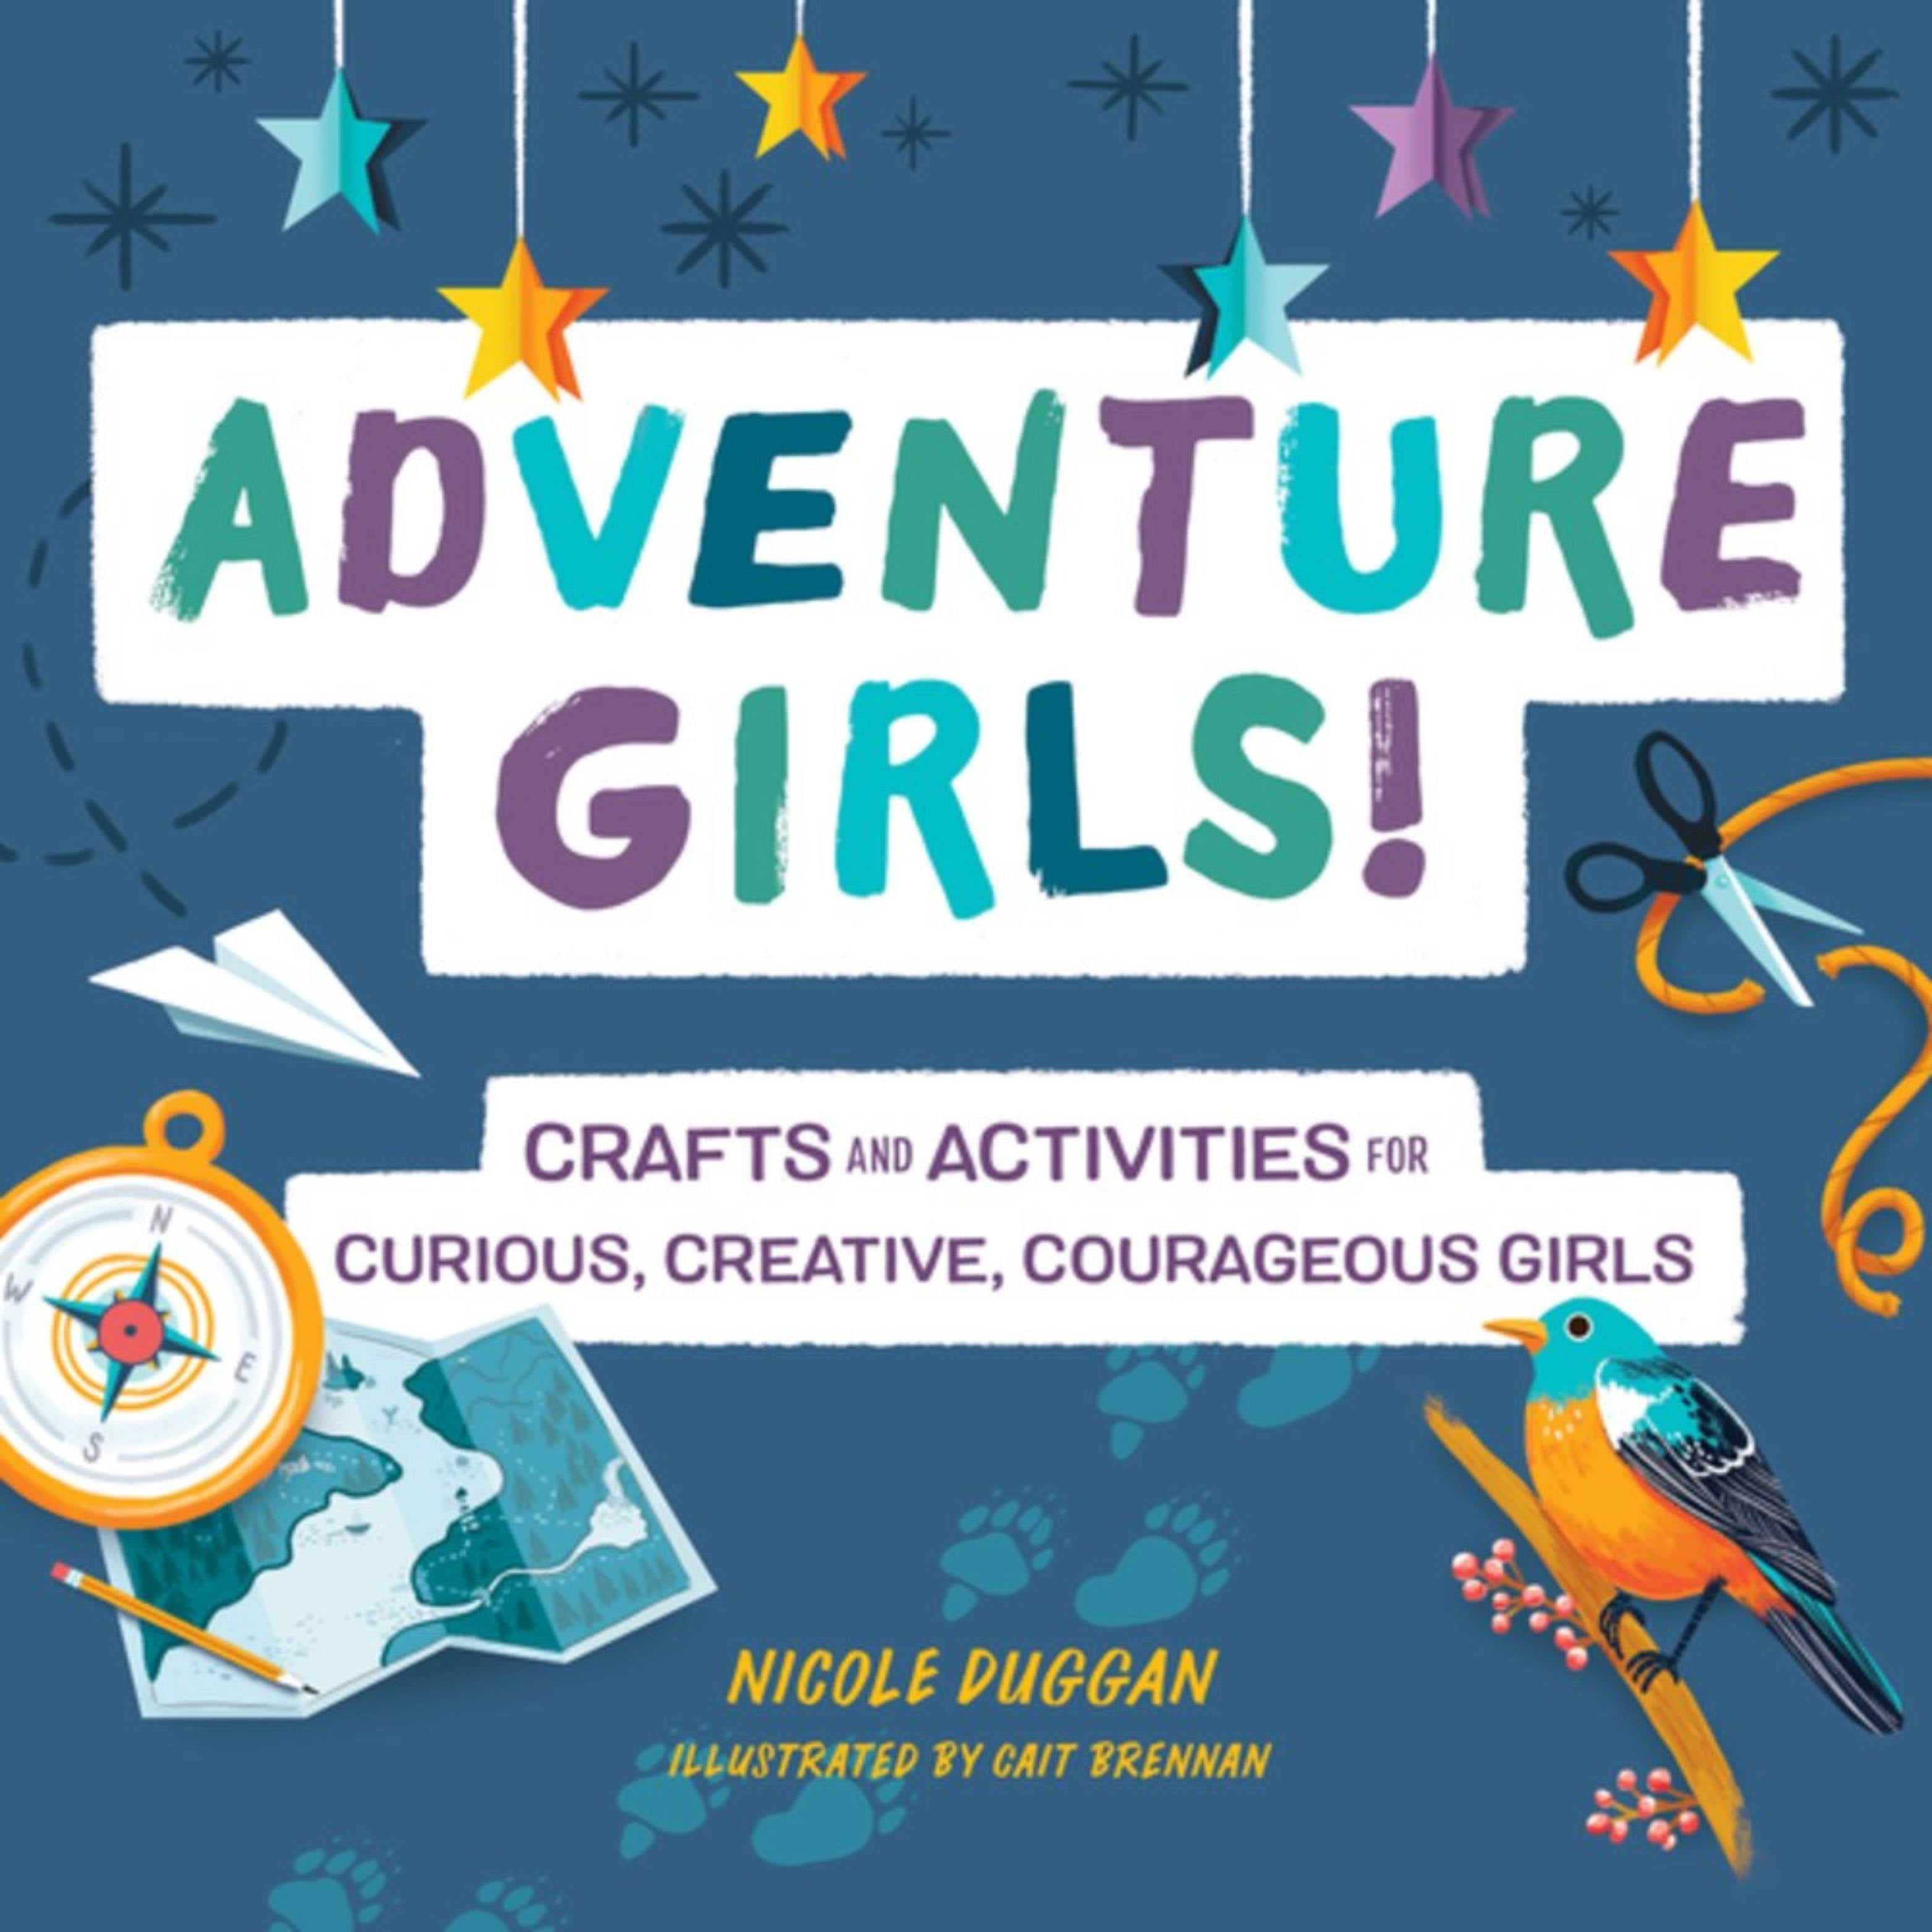 Adventure Girls!: Crafts and Activities for Curious, Creative, Courageous Girls [Book]